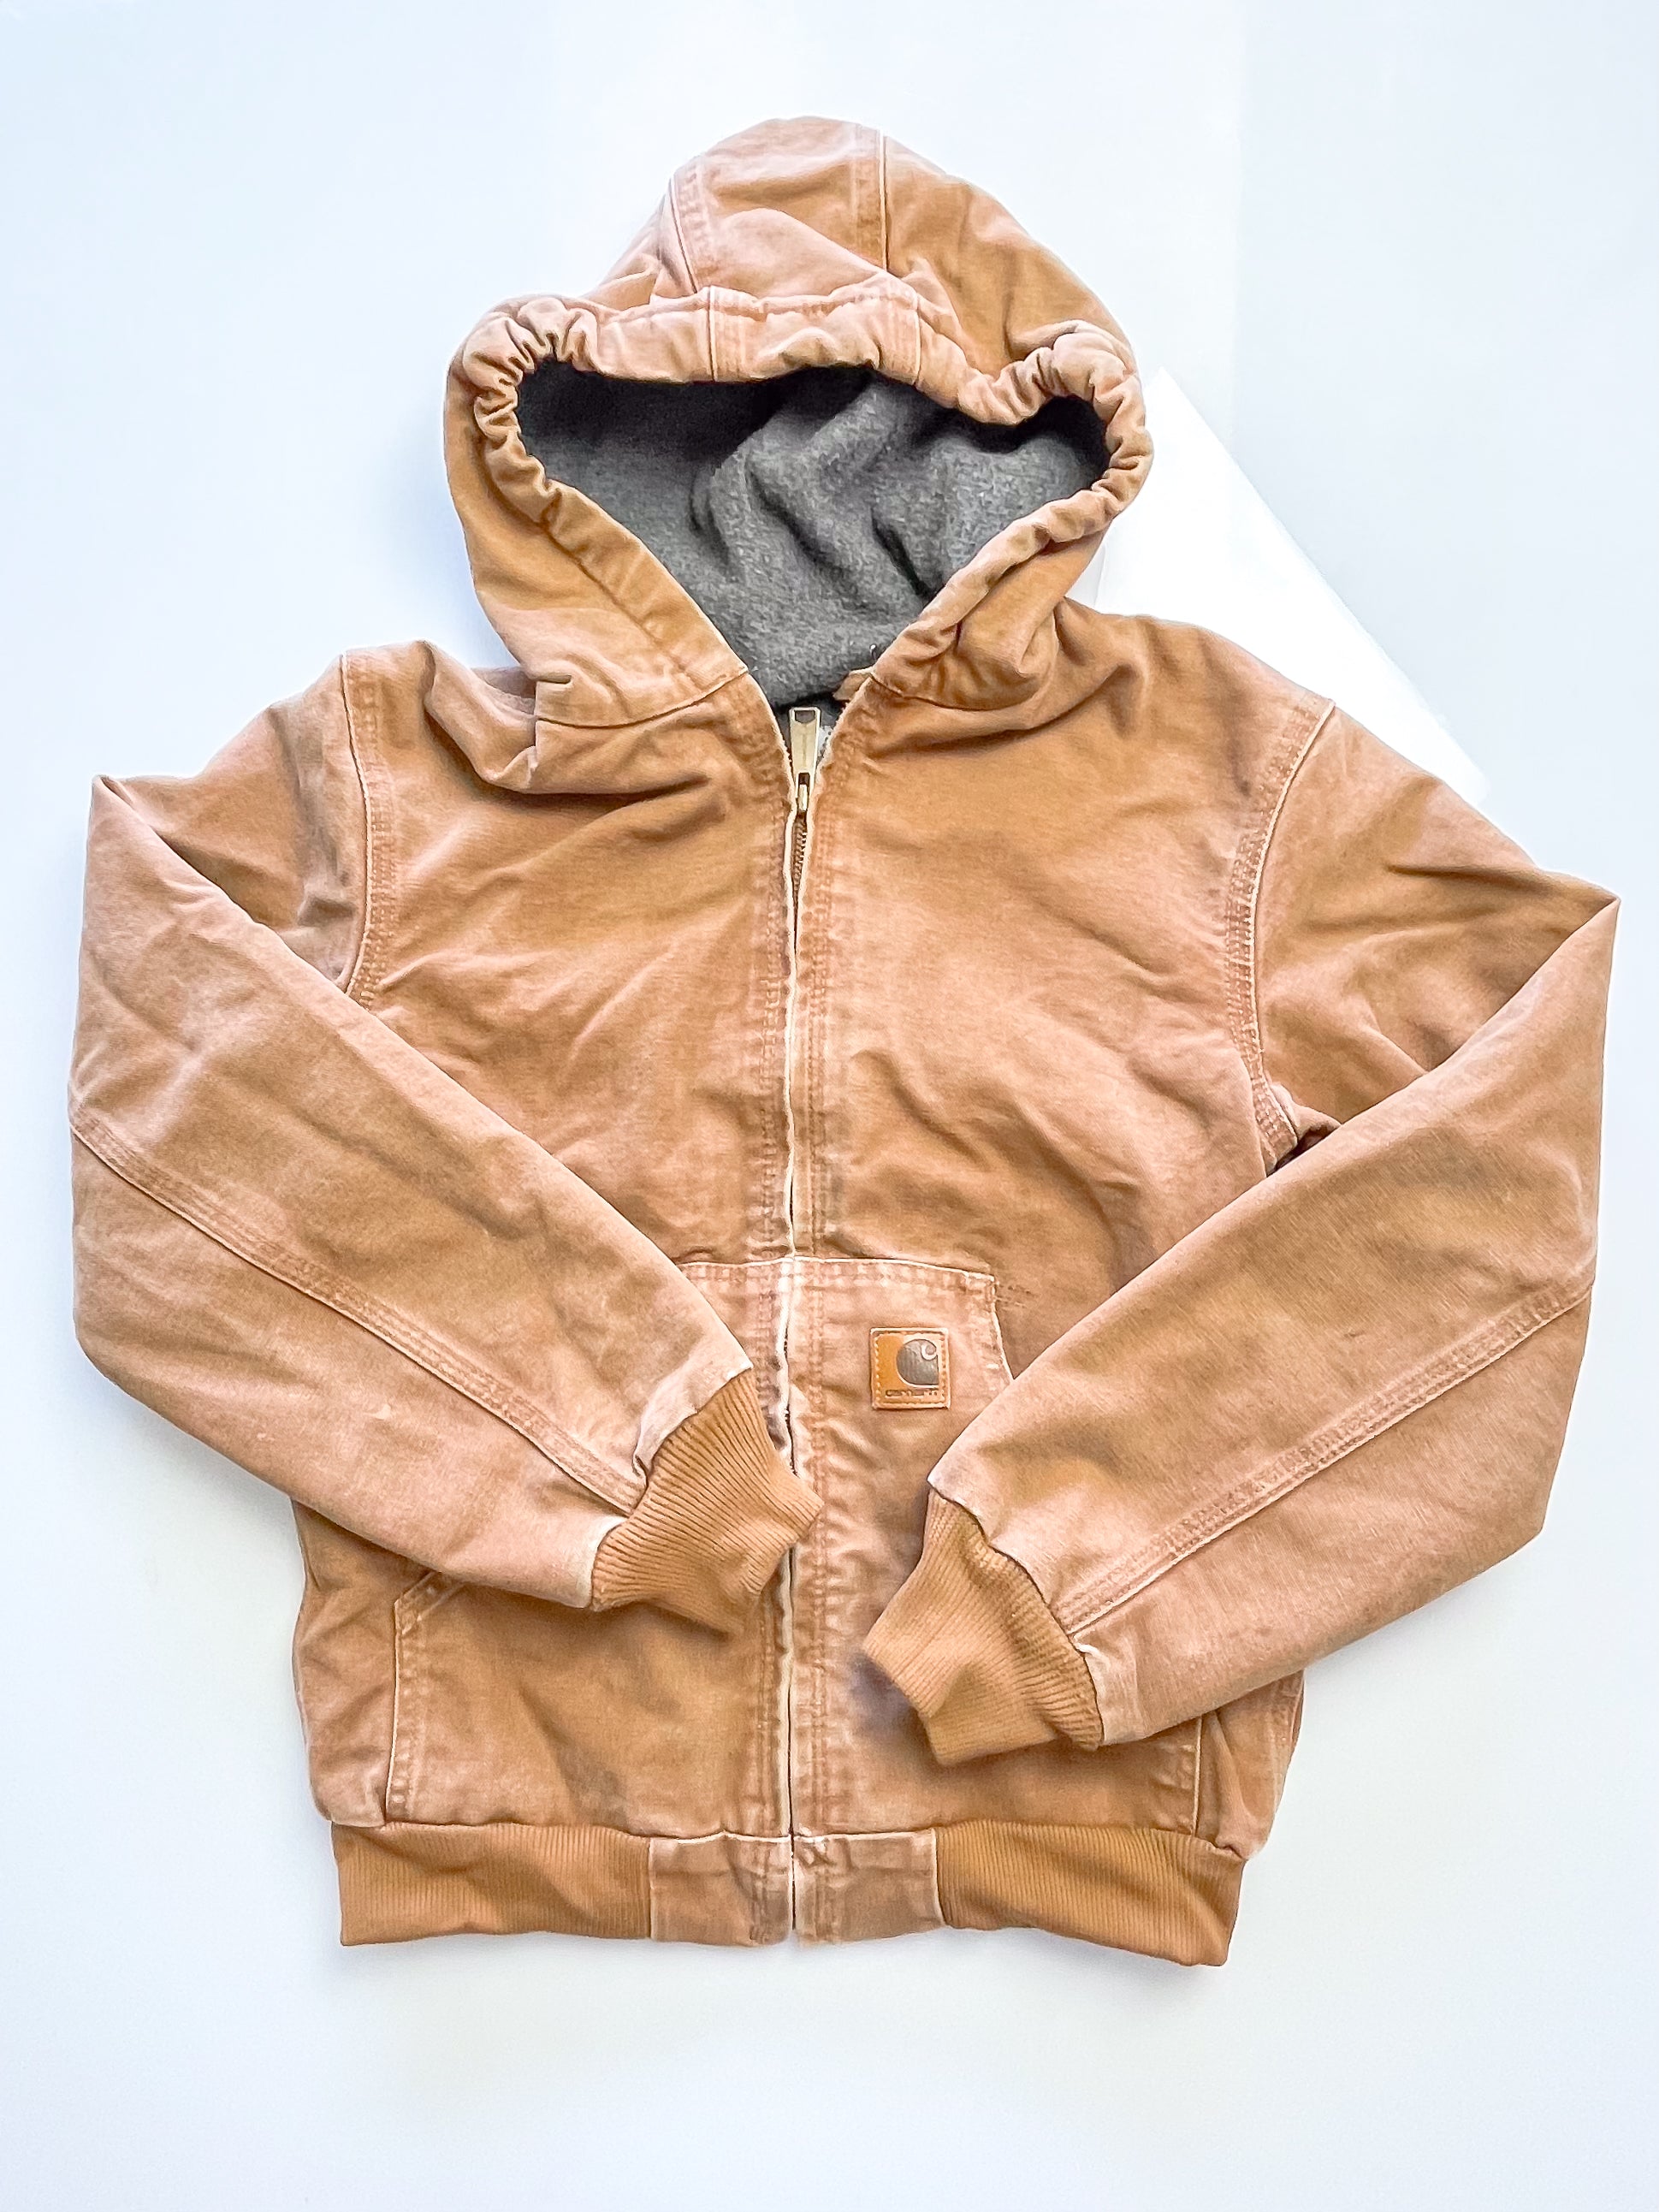 Retro Vintage Carhartt quilt lined hooded jacket '07 (10-12y)